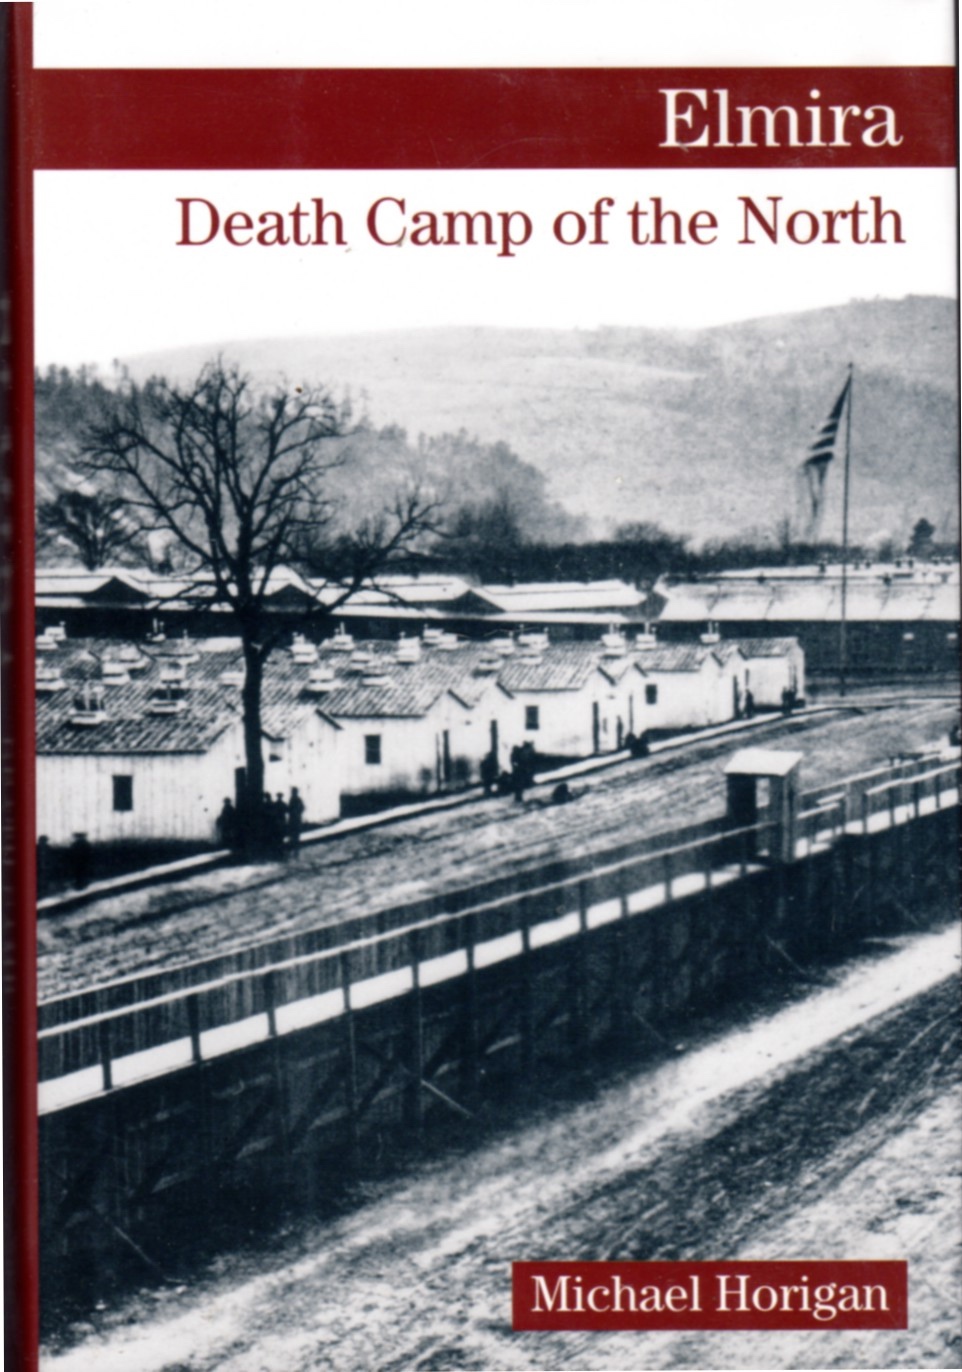 Image for Elmira Death Camp of the North